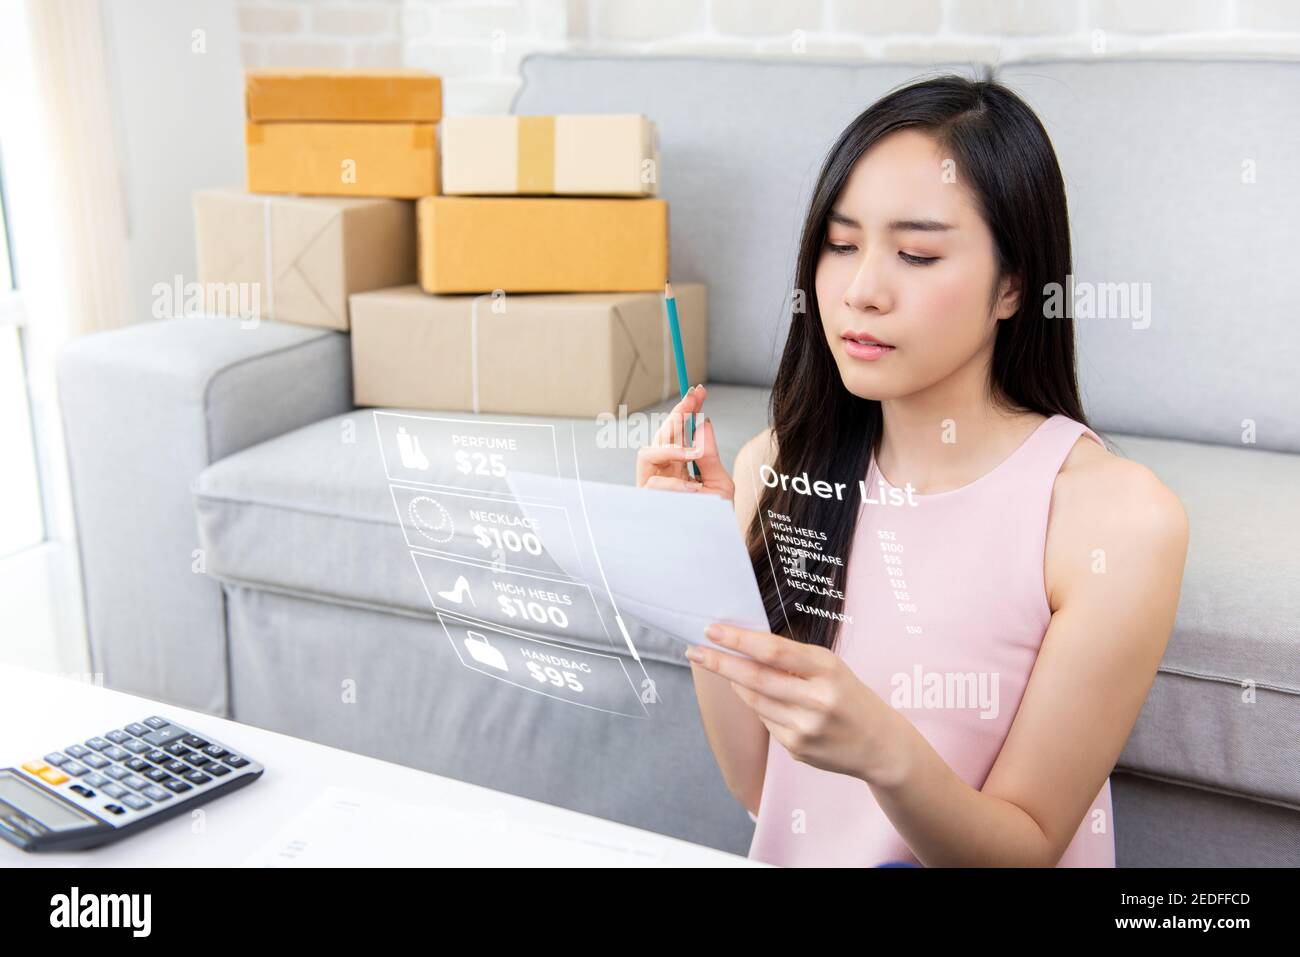 Young Asian woman entrepreneur or freelance online seller working at home checking orders preparing for delivery packages to customers Stock Photo